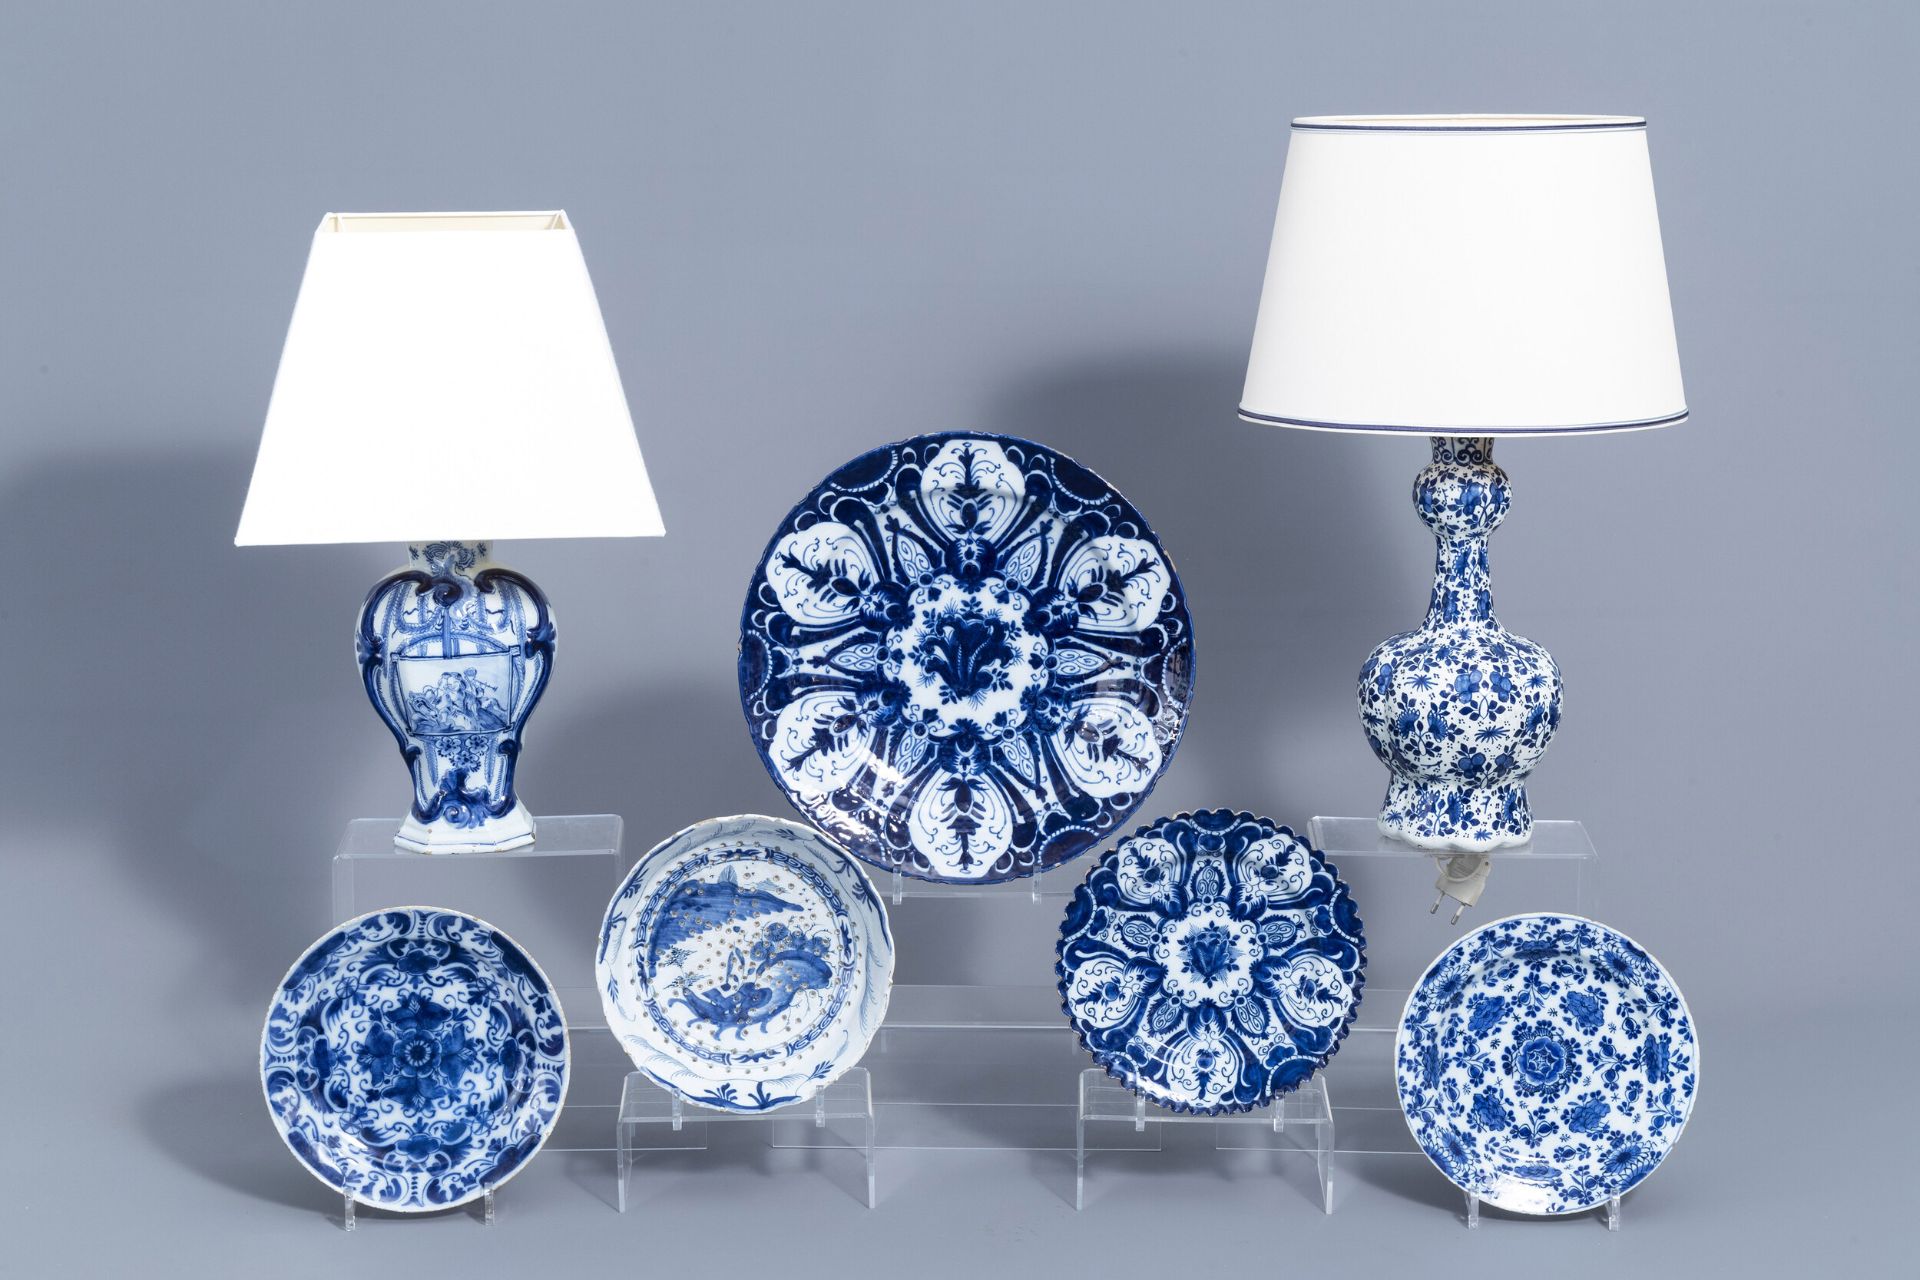 A varied collection of Dutch Delft blue and white pottery with mosty floral designs, 18th C.